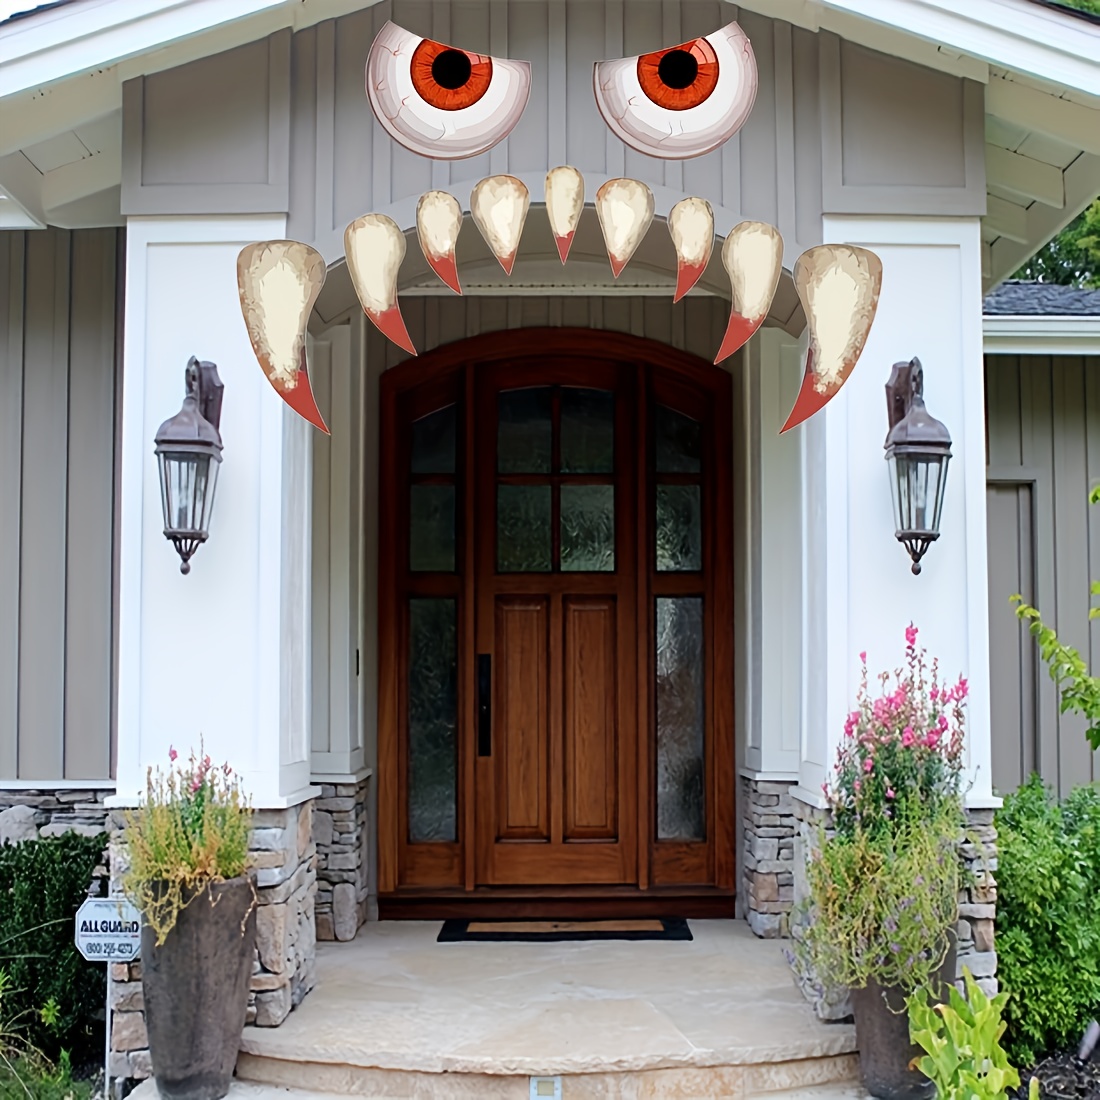 Halloween Monster Face Decorations Outdoor,Large Eyes Fangs